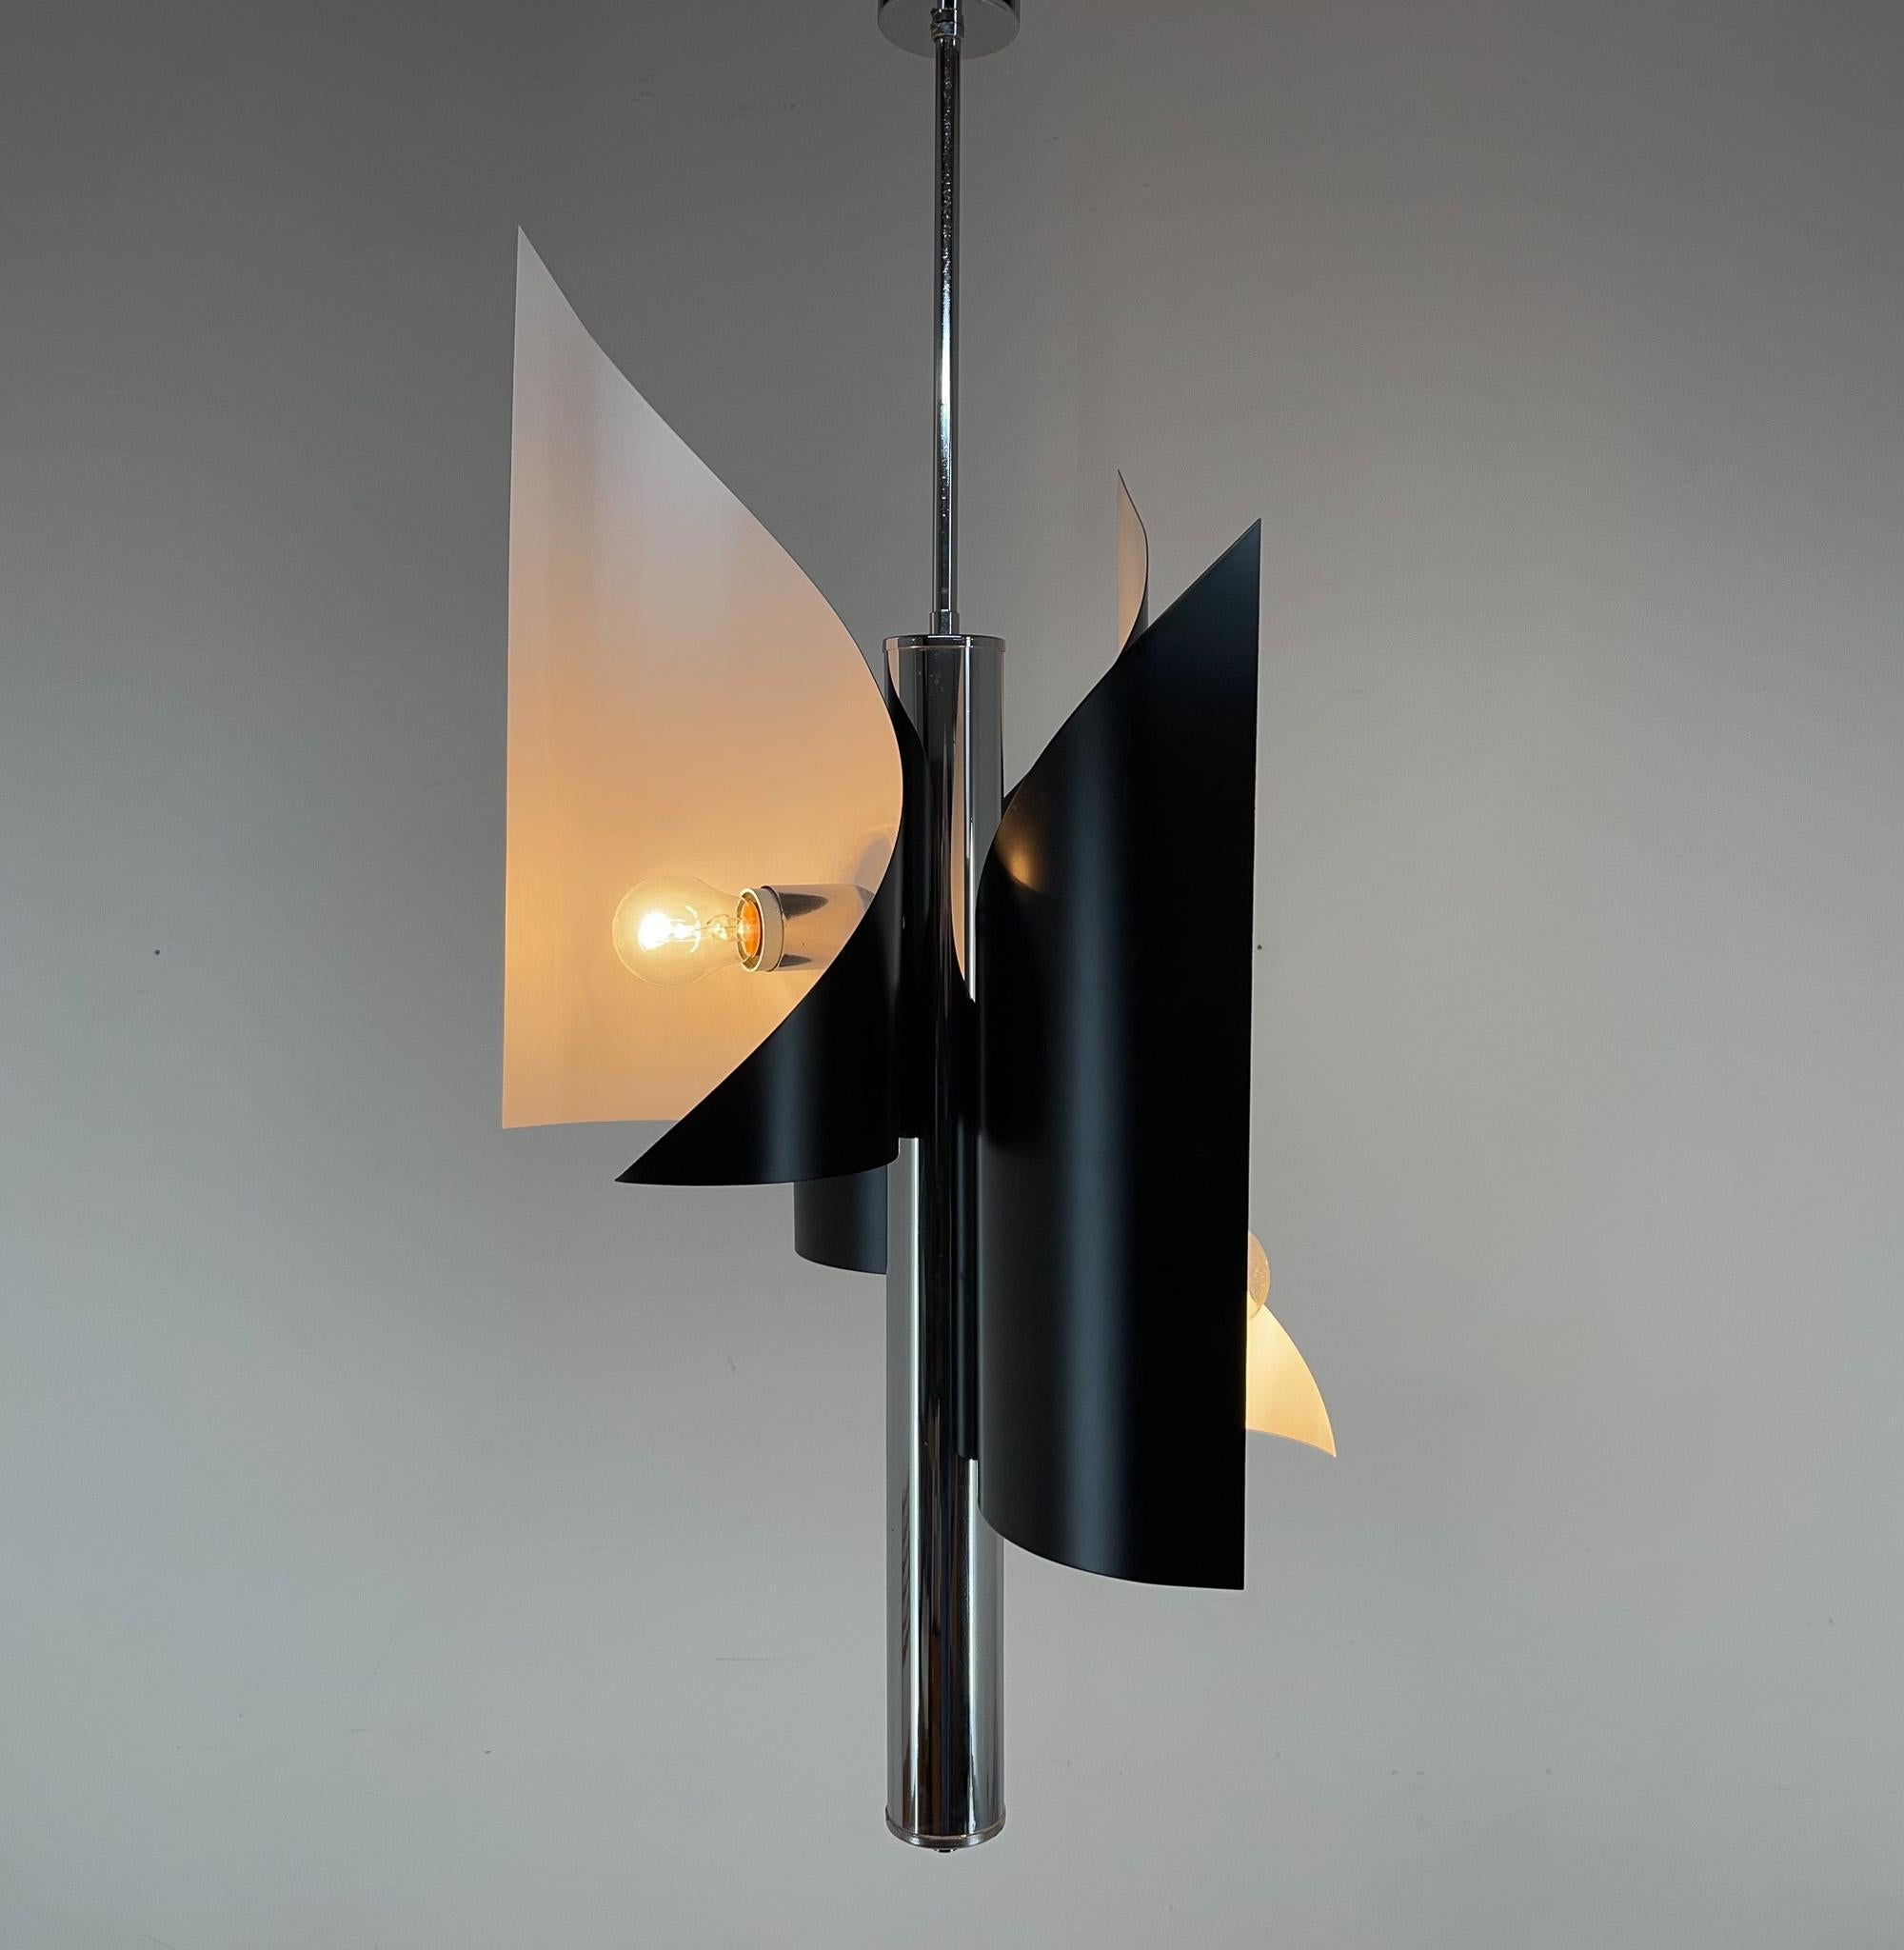 Beatiful vintage asymetrical chandelier / pendant from Italy. Produced in the 1970's. Made of chrome and laquered metal in blue colour. Newly sprayed in black and white colour. Bulbs: 3 x E25-E27.